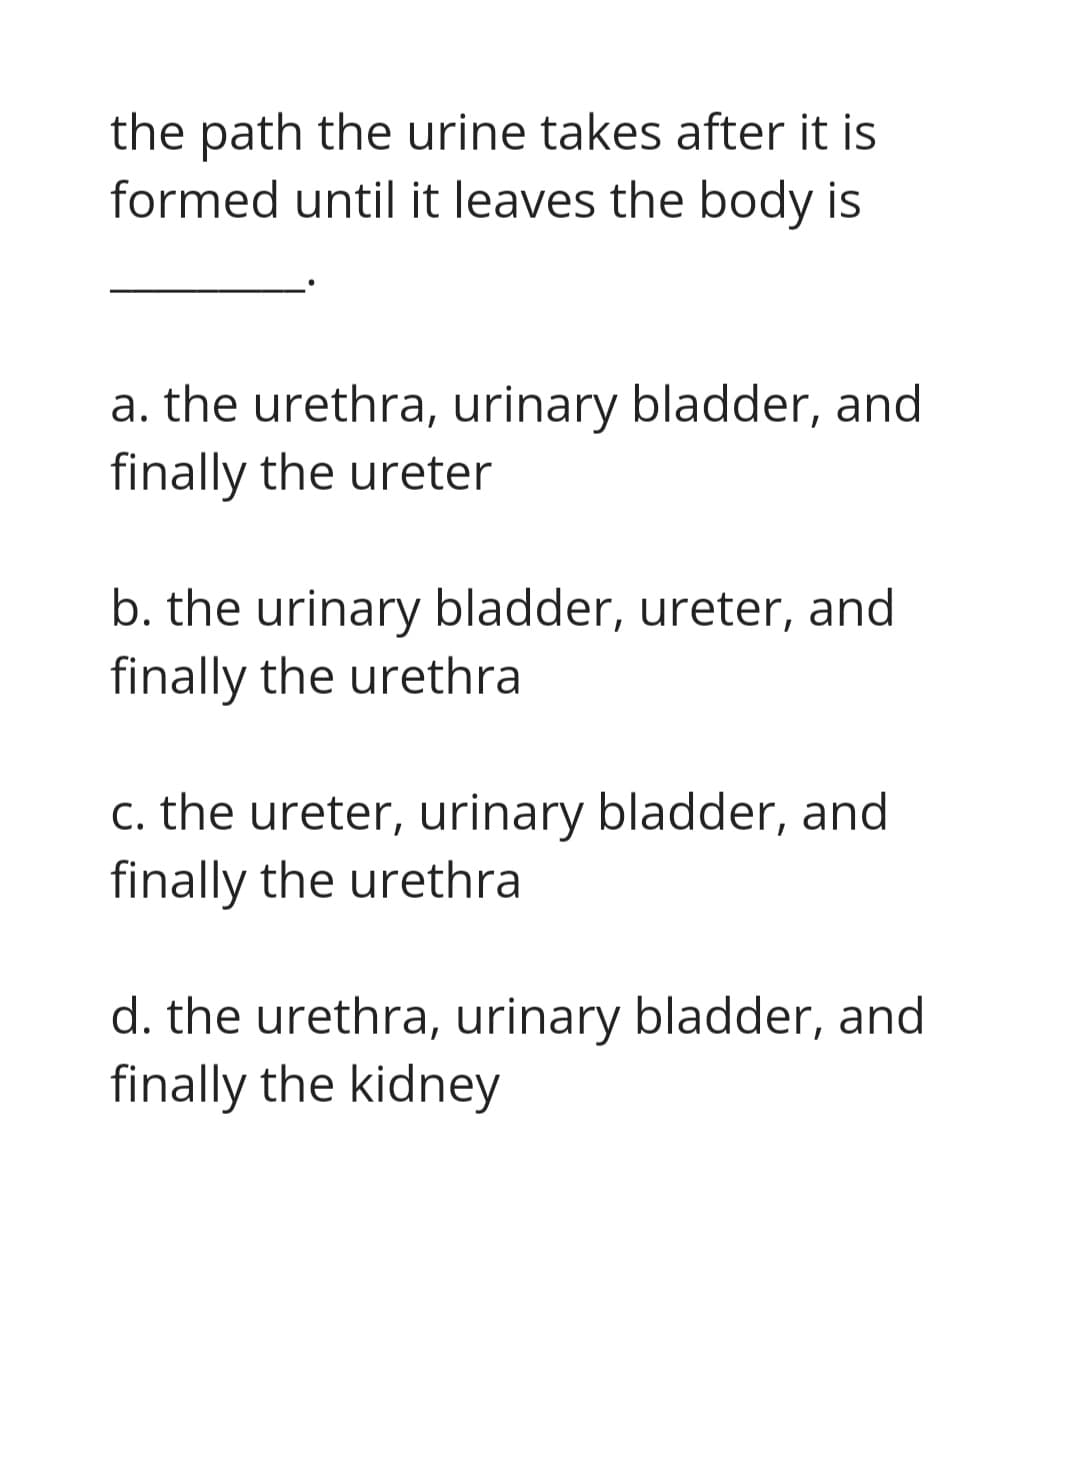 the path the urine takes after it is
formed until it leaves the body is
a. the urethra, urinary bladder, and
finally the ureter
b. the urinary bladder, ureter, and
finally the urethra
c. the ureter, urinary bladder, and
finally the urethra
d. the urethra, urinary bladder, and
finally the kidney
